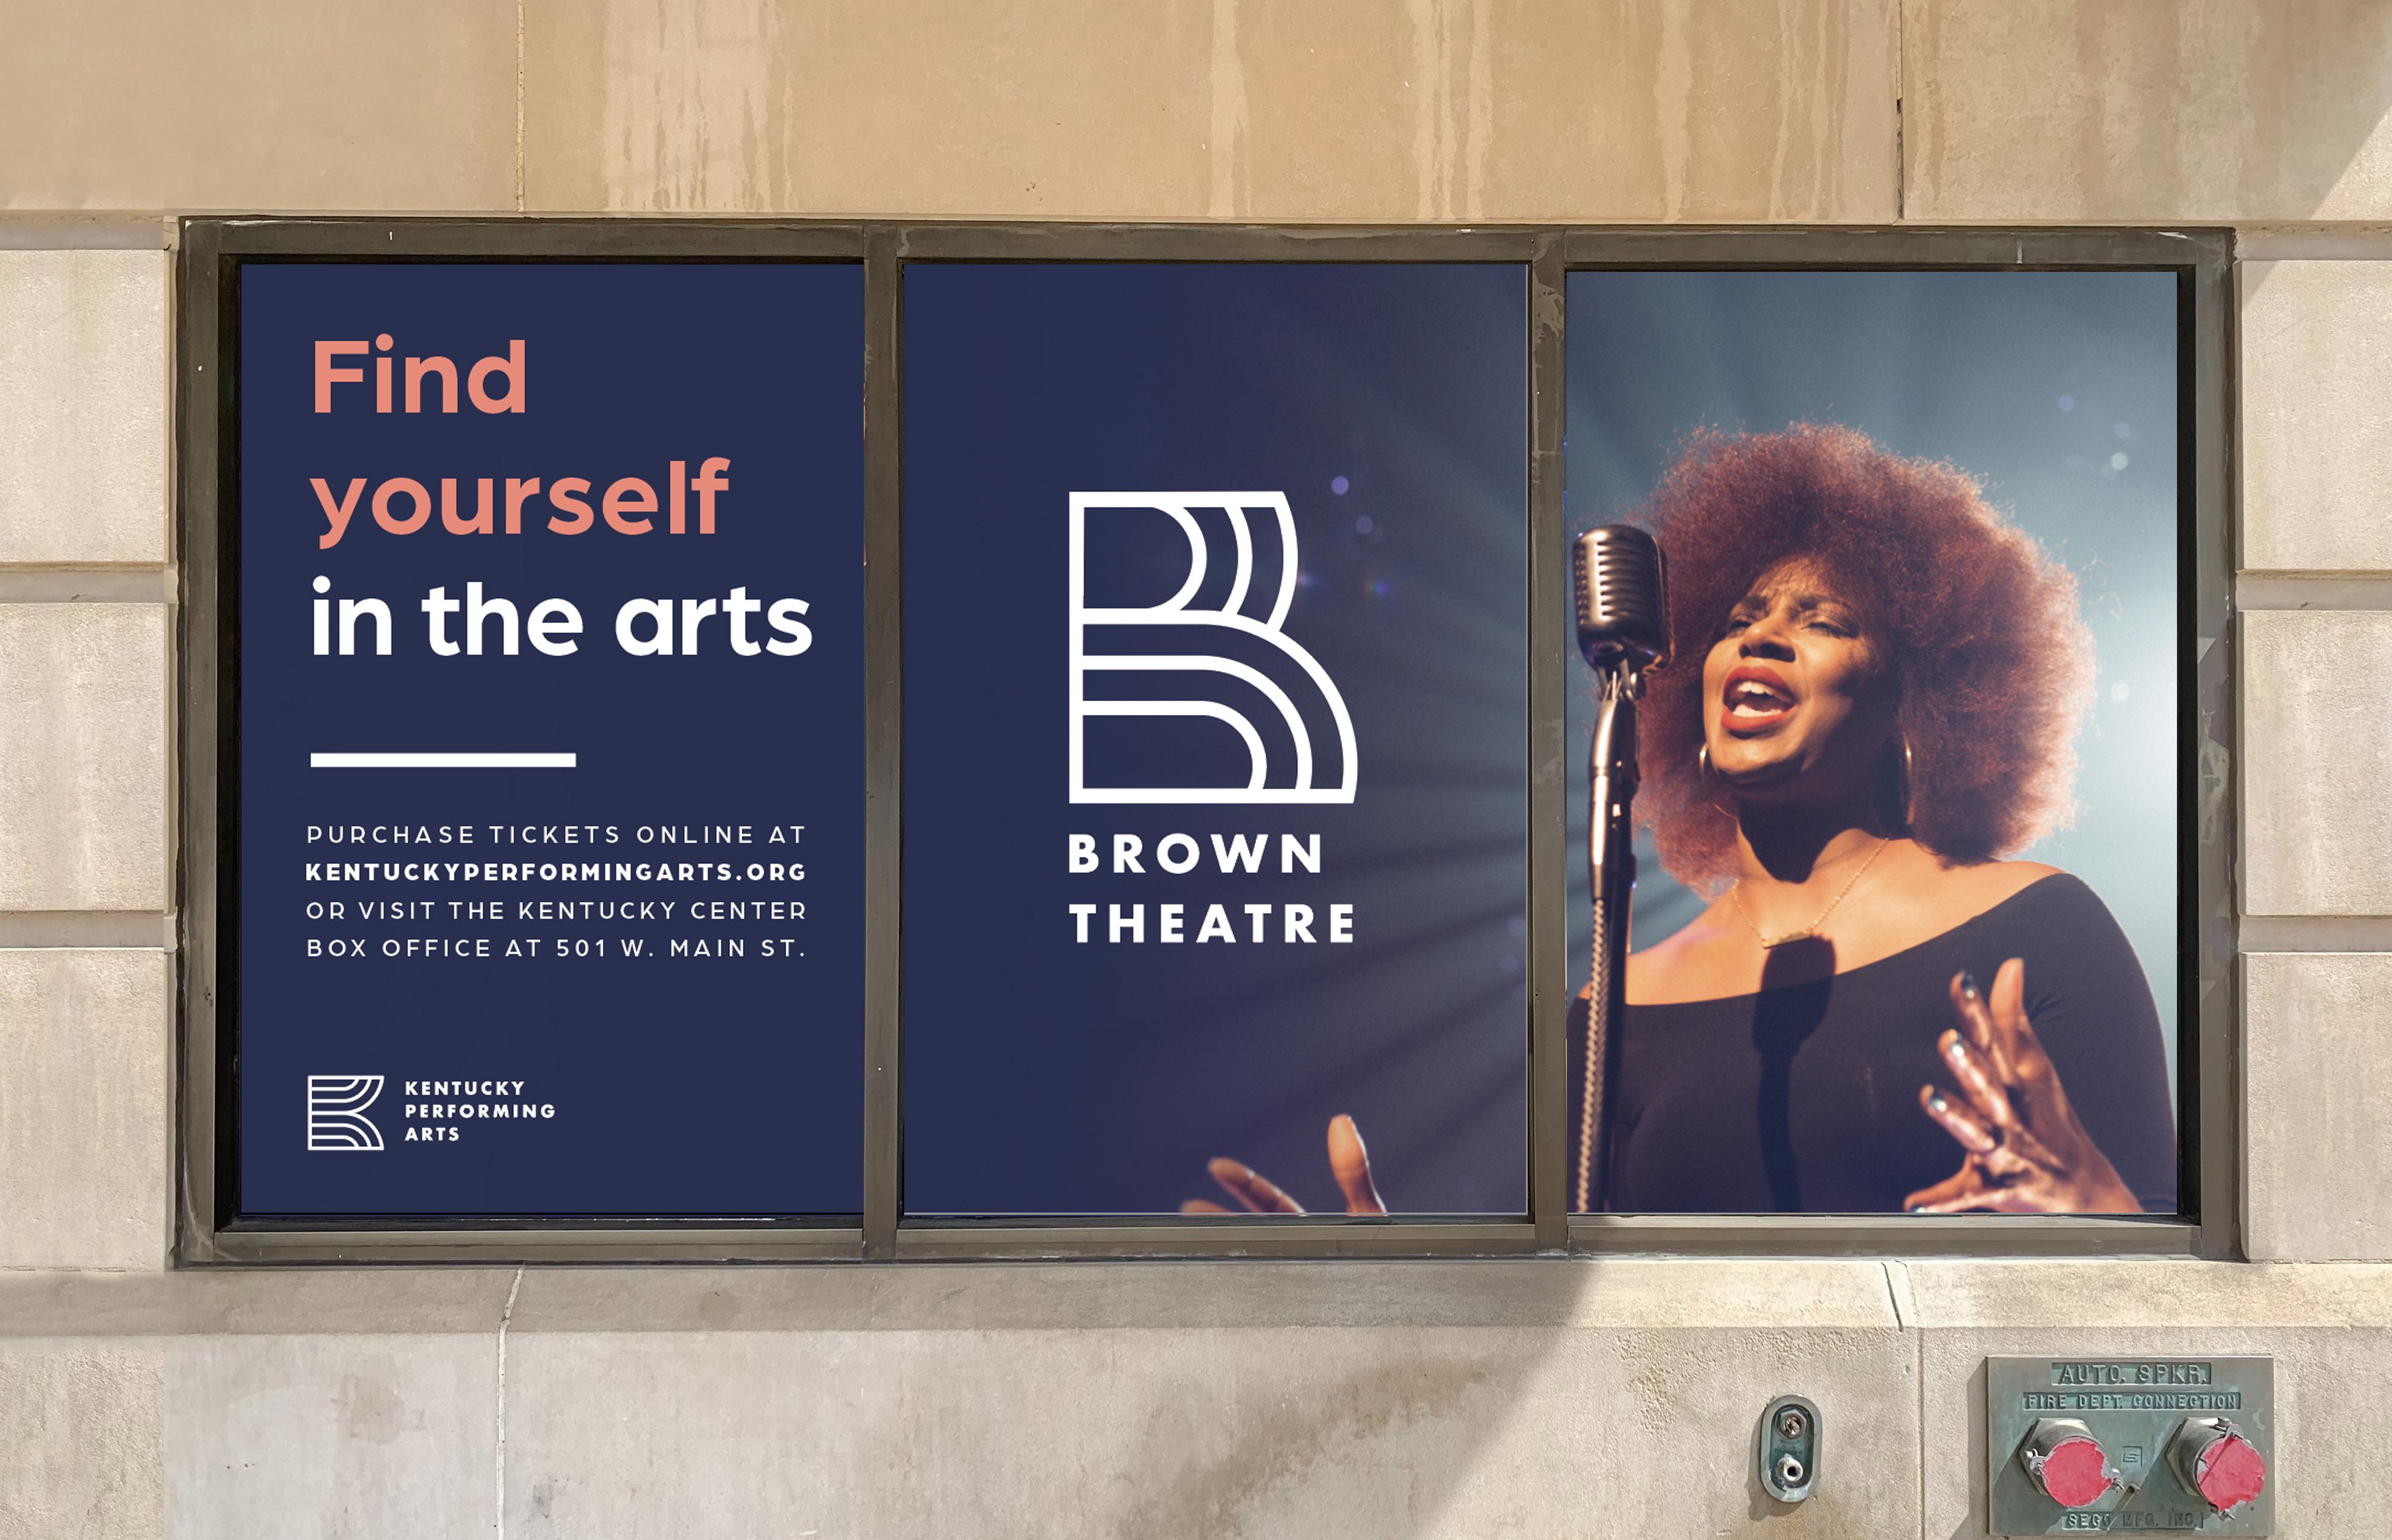 Brown Theatre out-of-home poster advertisements.